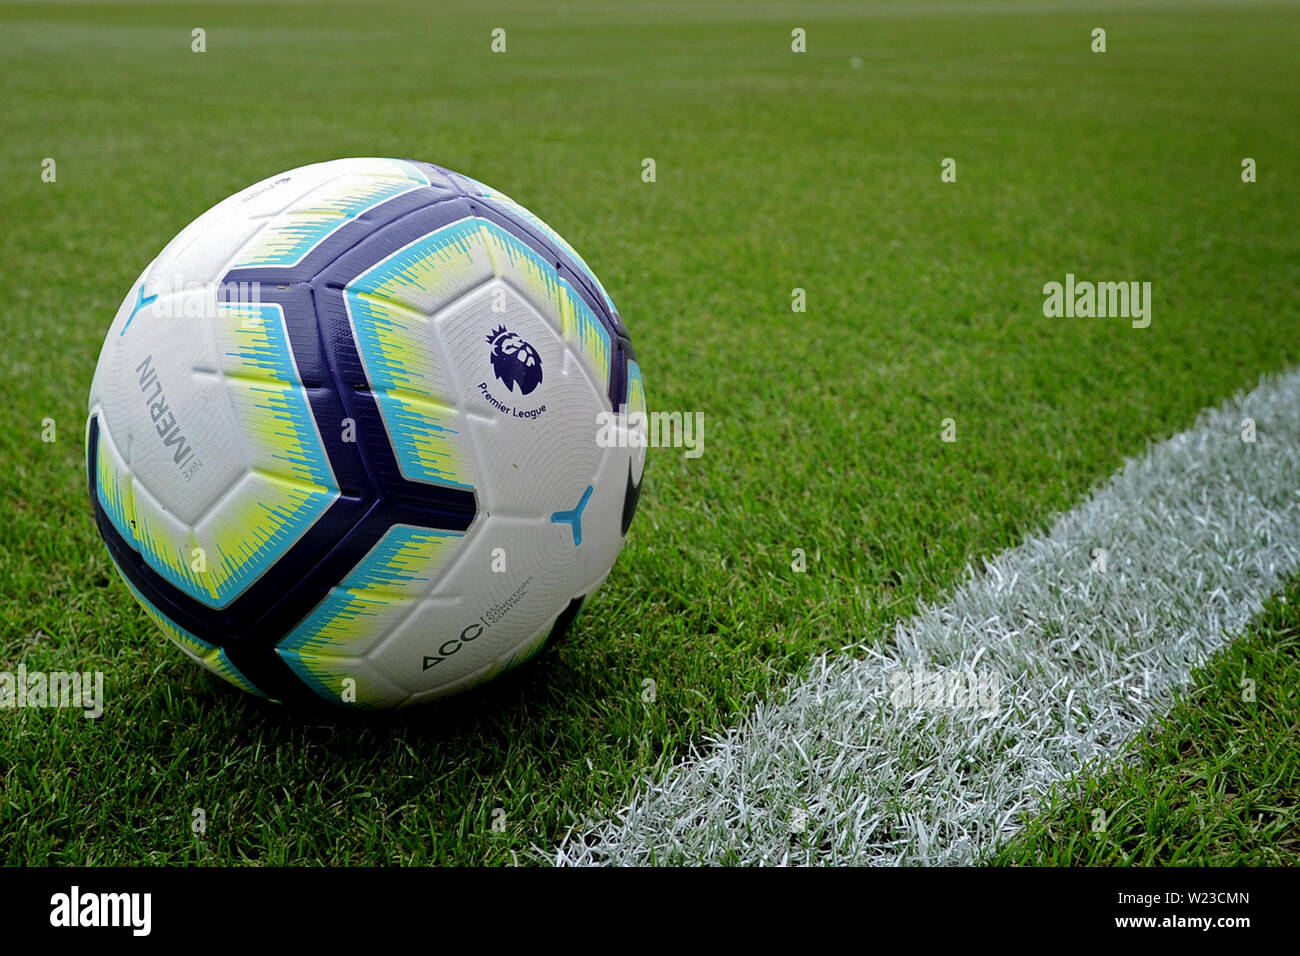 Nike Merlin Ball 2018 19 Premier League High Resolution Stock Photography  and Images - Alamy